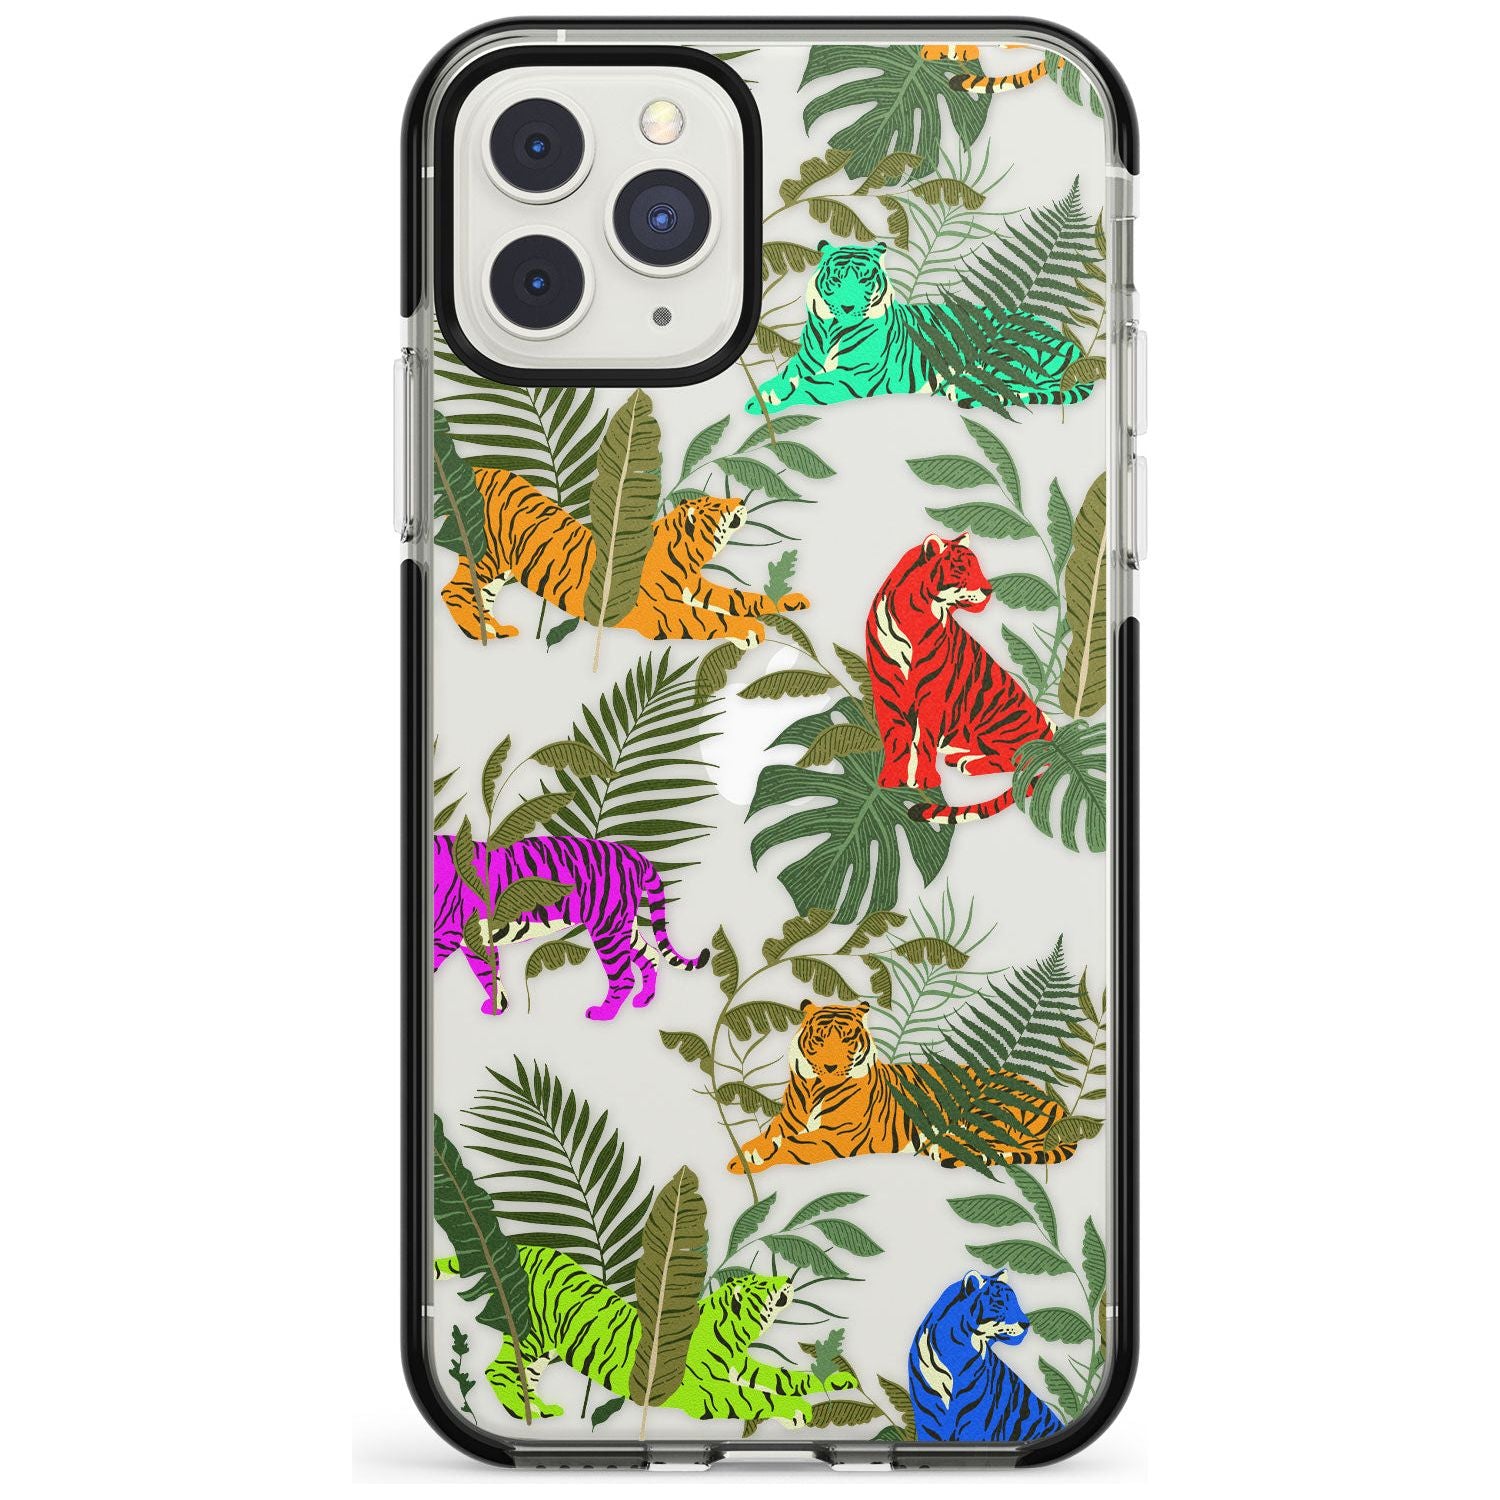 Colourful Tiger Jungle Cat Pattern Black Impact Phone Case for iPhone 11 Pro Max